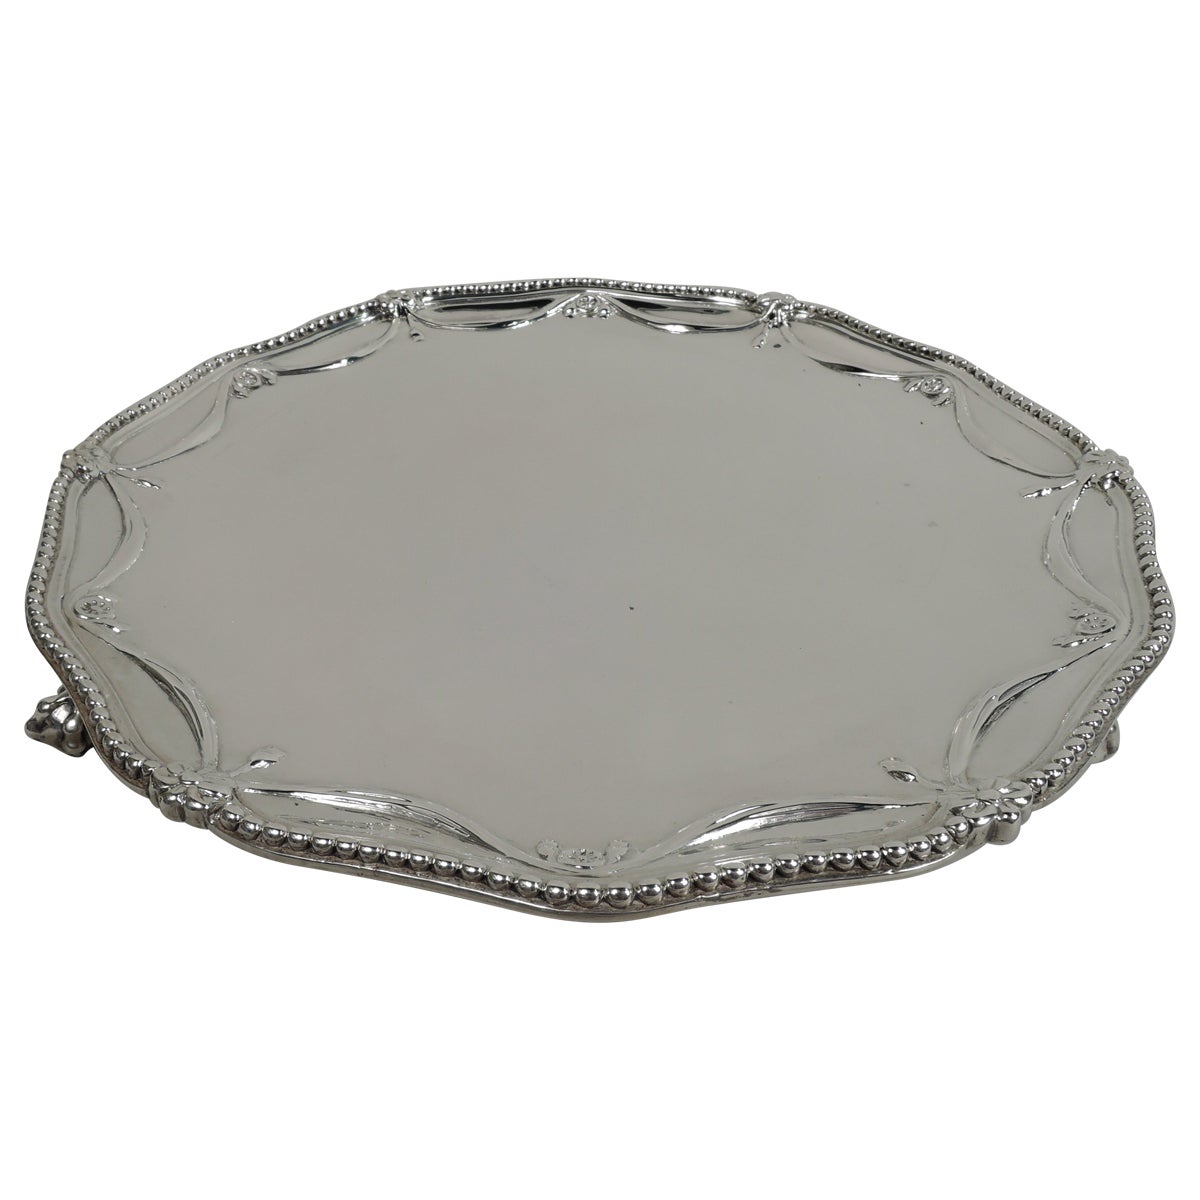 English Georgian Neoclassical Sterling Silver Salver Tray by Rugg